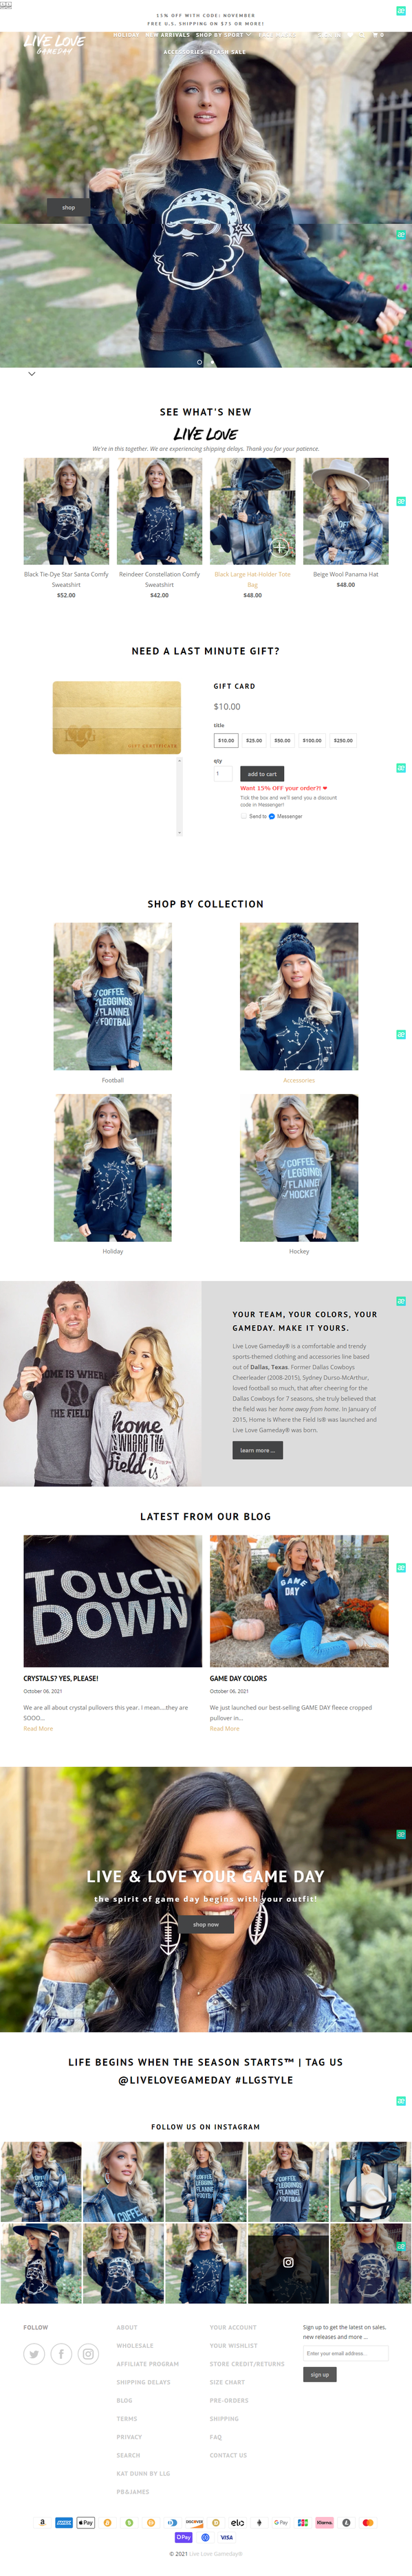 - Live Love Gameday - Gameday Outfits And Accessories For Every Sport_ - livelovegameday.com.png